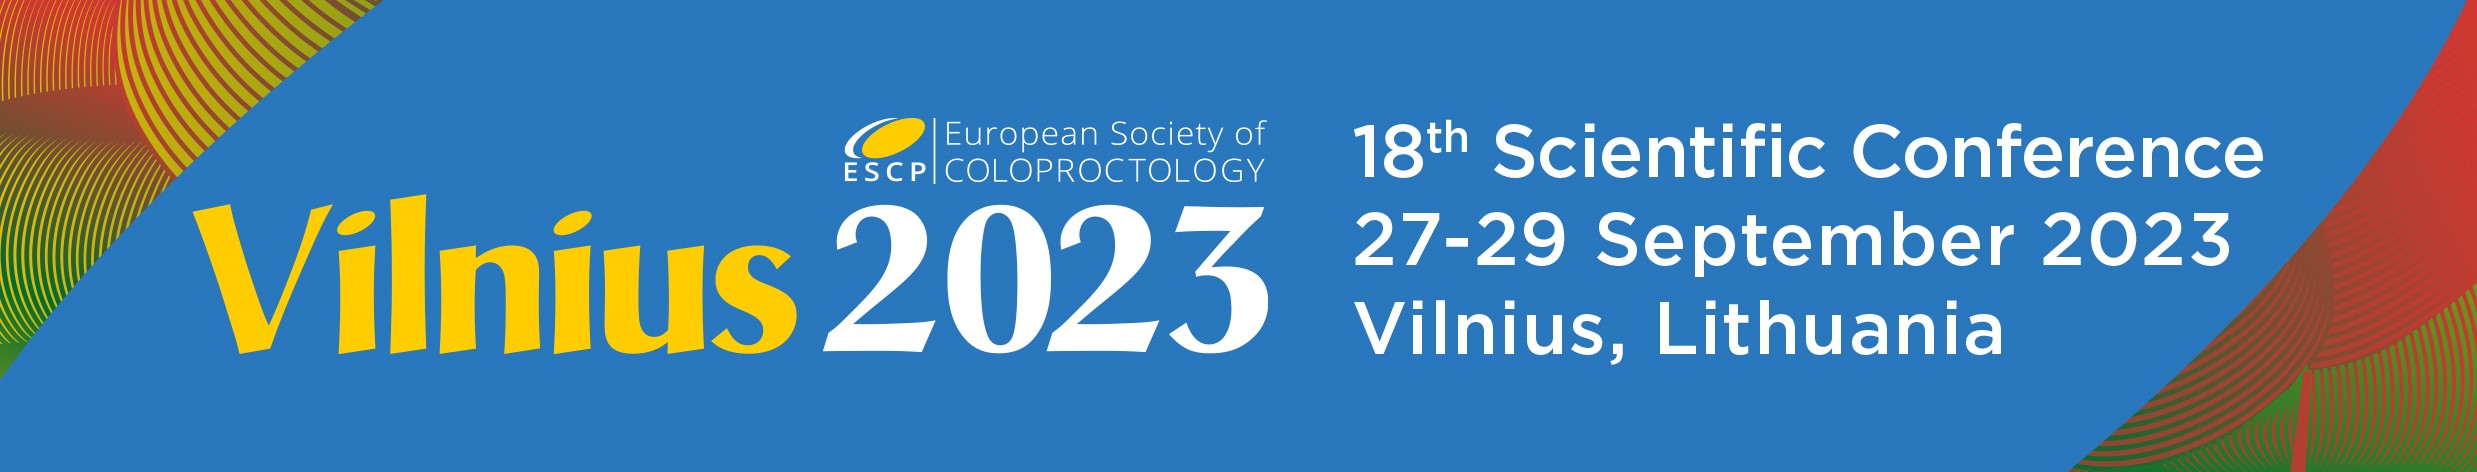 European Society of Coloproctology Conference